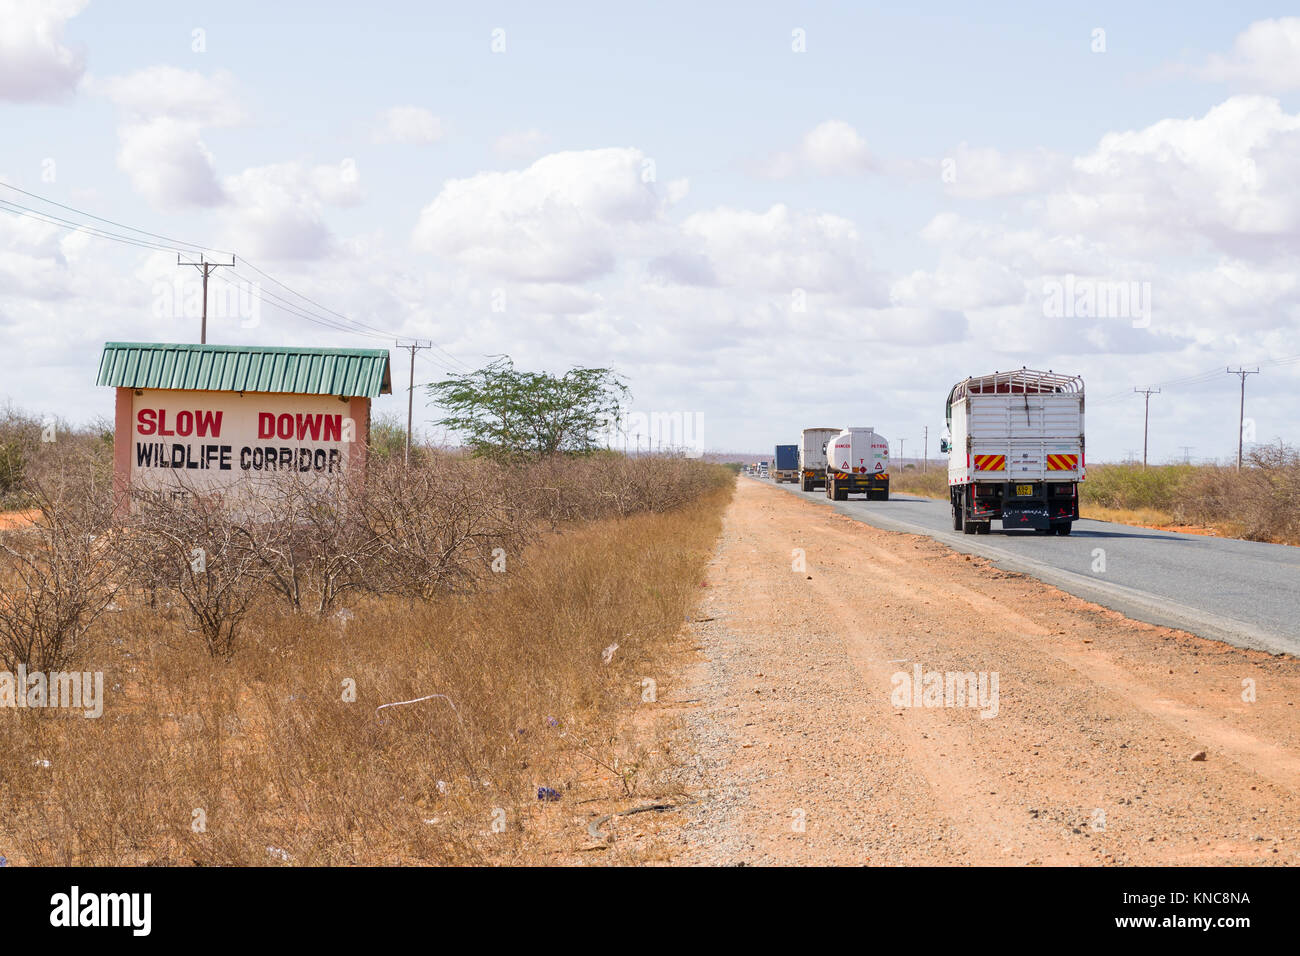 Trucks and other vehicles driving on the Mombasa road past a sign that advises the area is a wildlife corridor, Kenya, East Africa Stock Photo